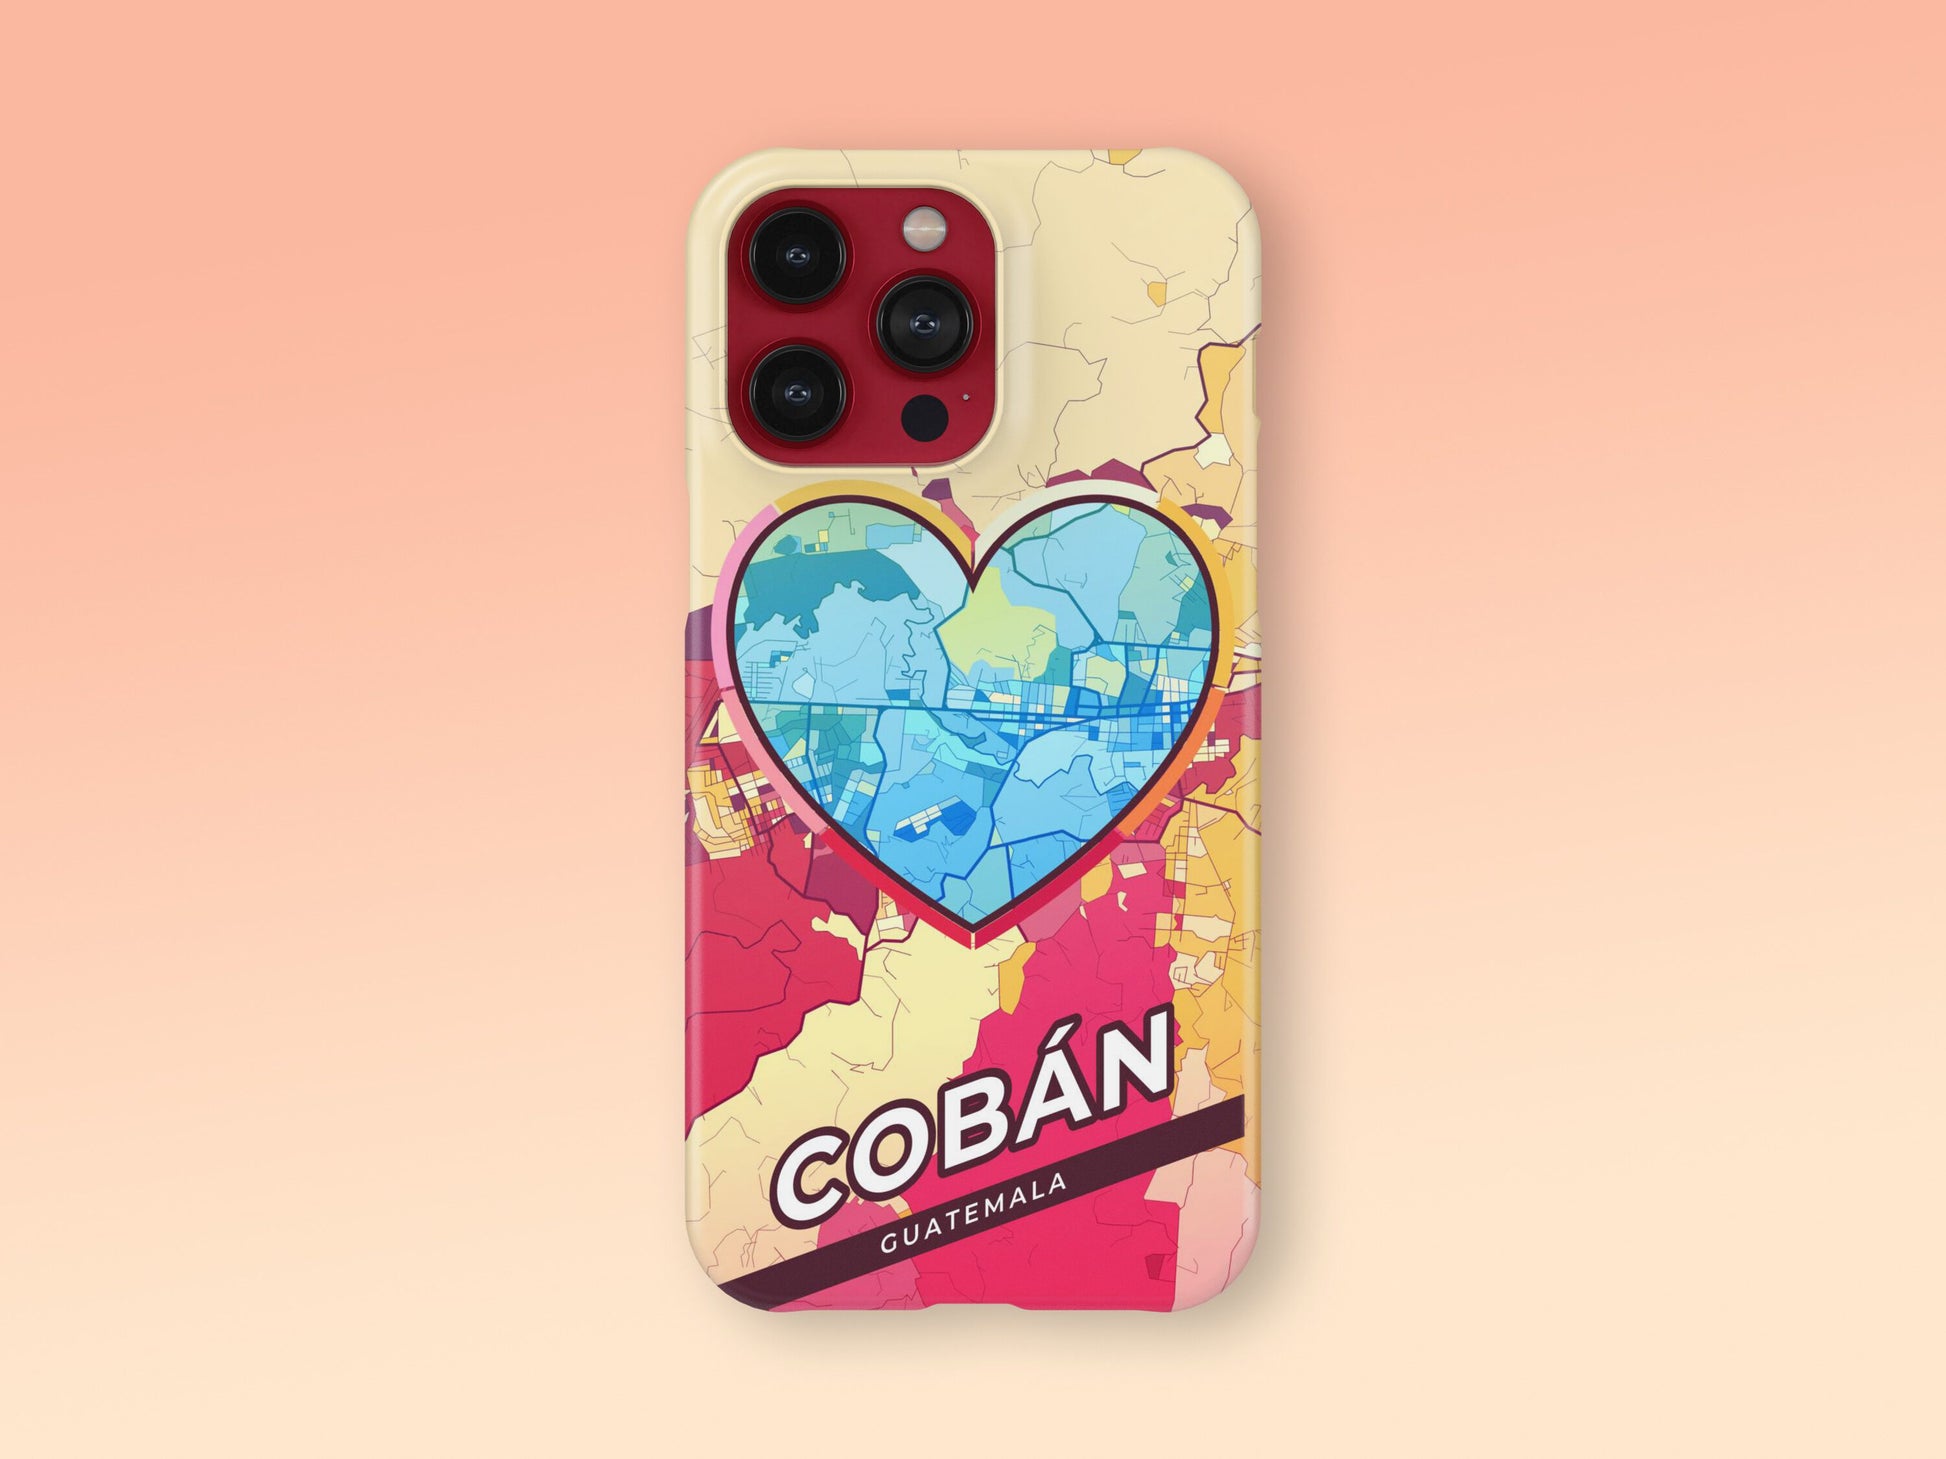 Cobán Guatemala slim phone case with colorful icon. Birthday, wedding or housewarming gift. Couple match cases. 2